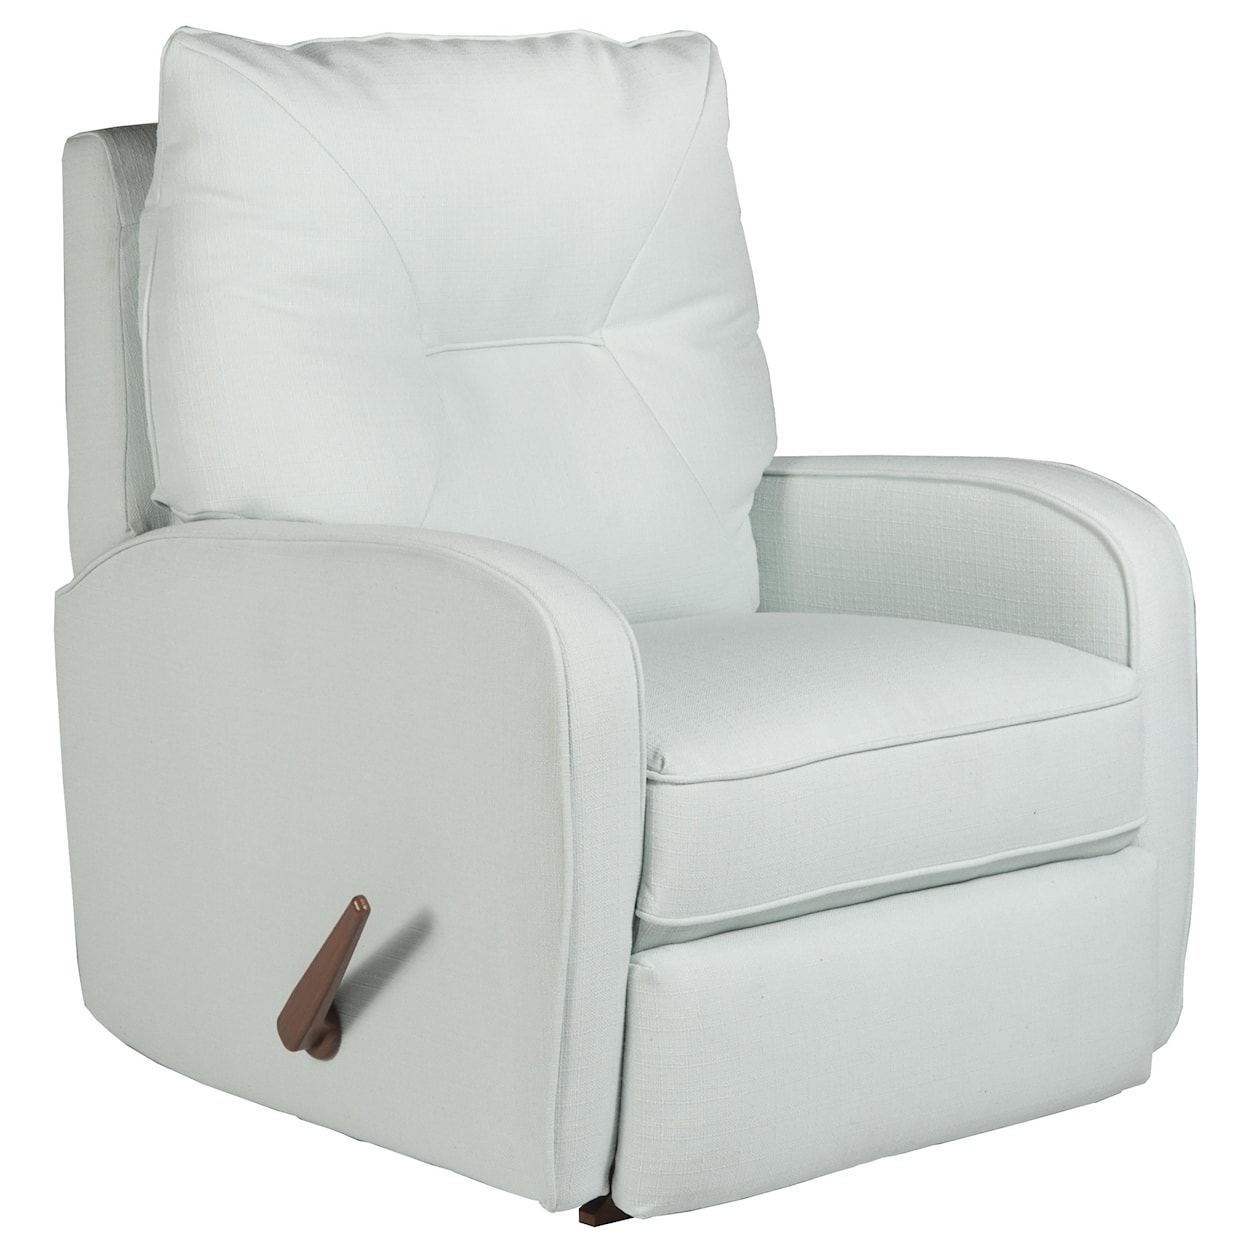 Best Home Furnishings Ingall Ingall Wallhugger Recliner